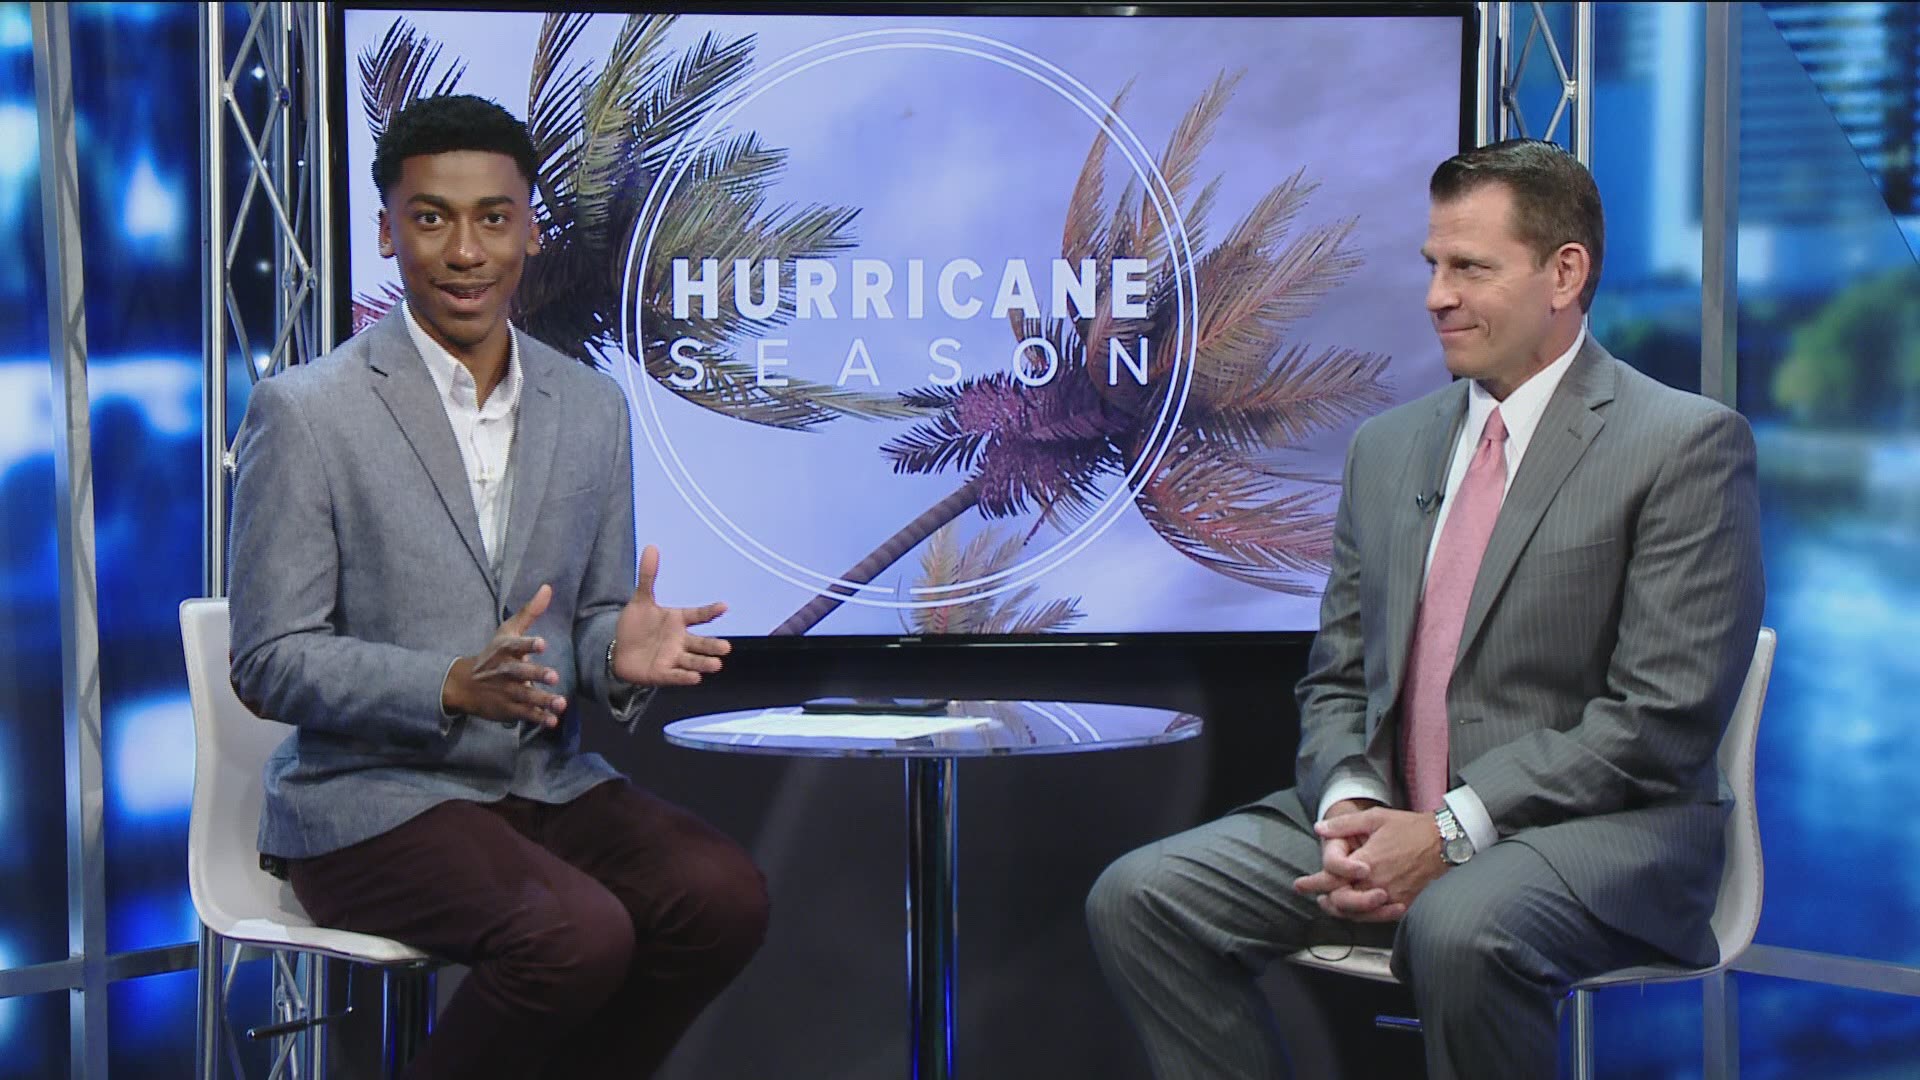 Joe Nowland of Jax Federal Credit Union shares tips about financially preparing for a hurricane.